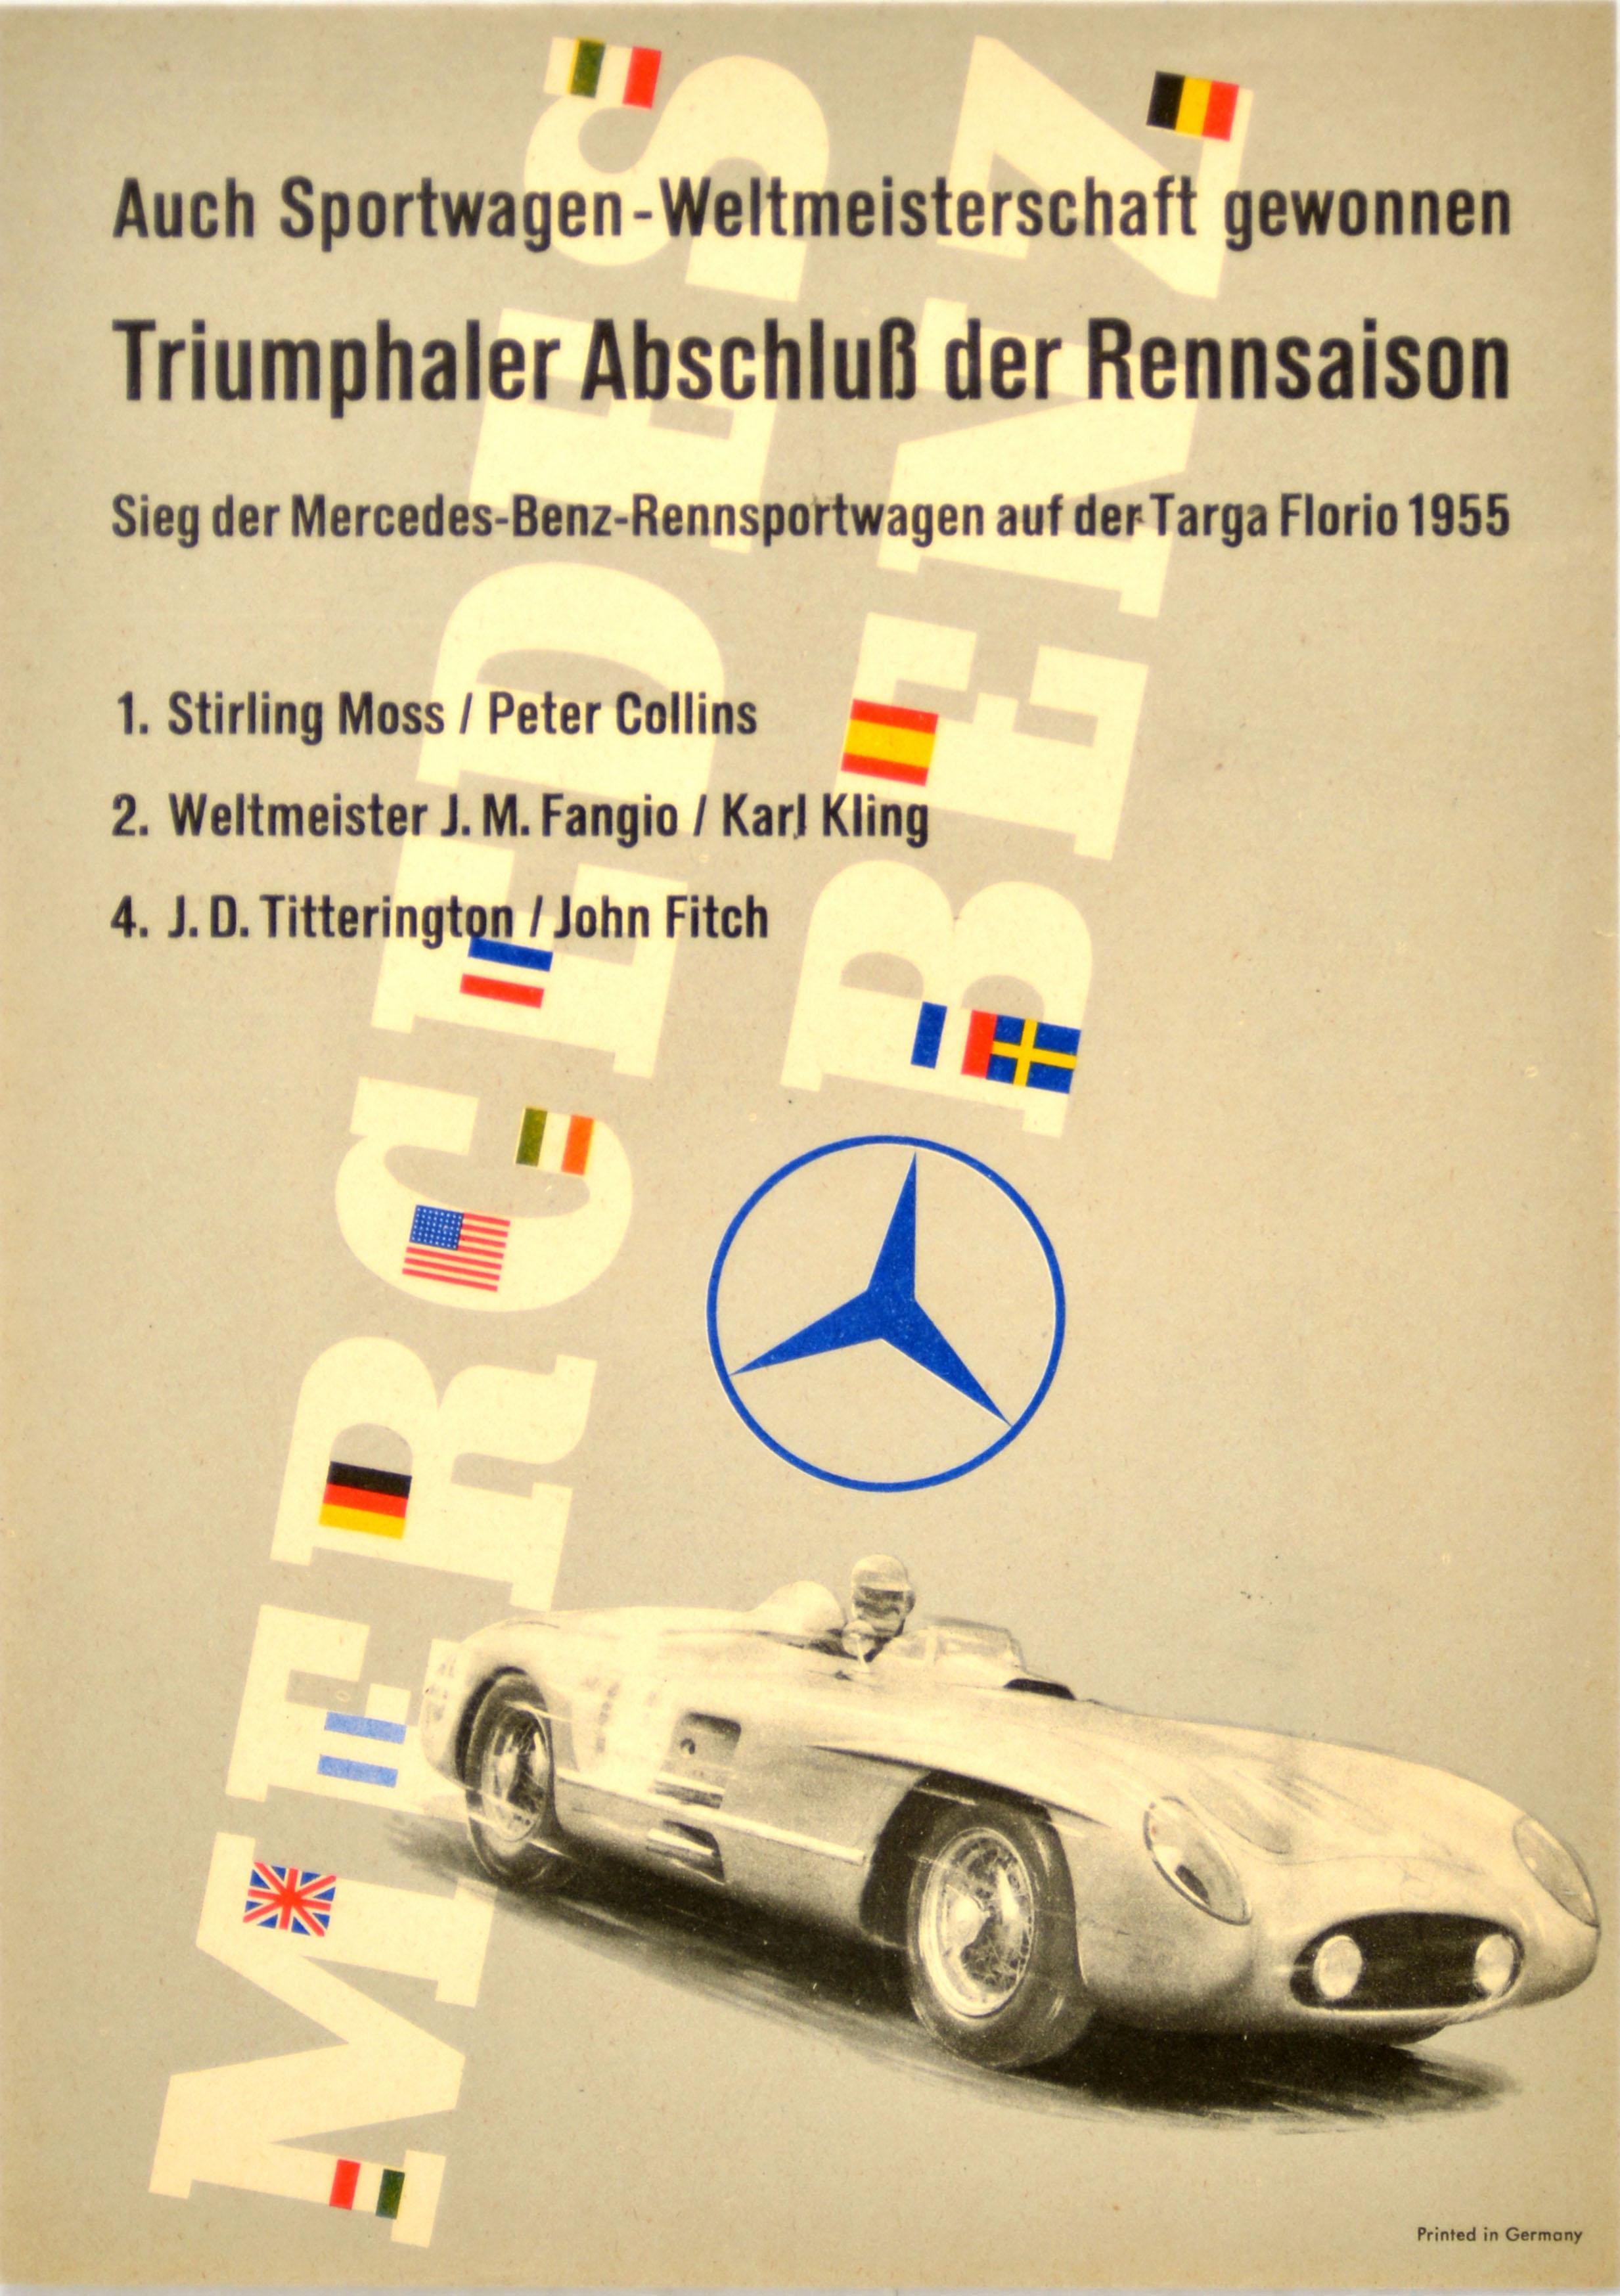 Unknown Print - Original Vintage Poster Mercedes Benz Sports Car Racing Art Stirling Moss Fangio